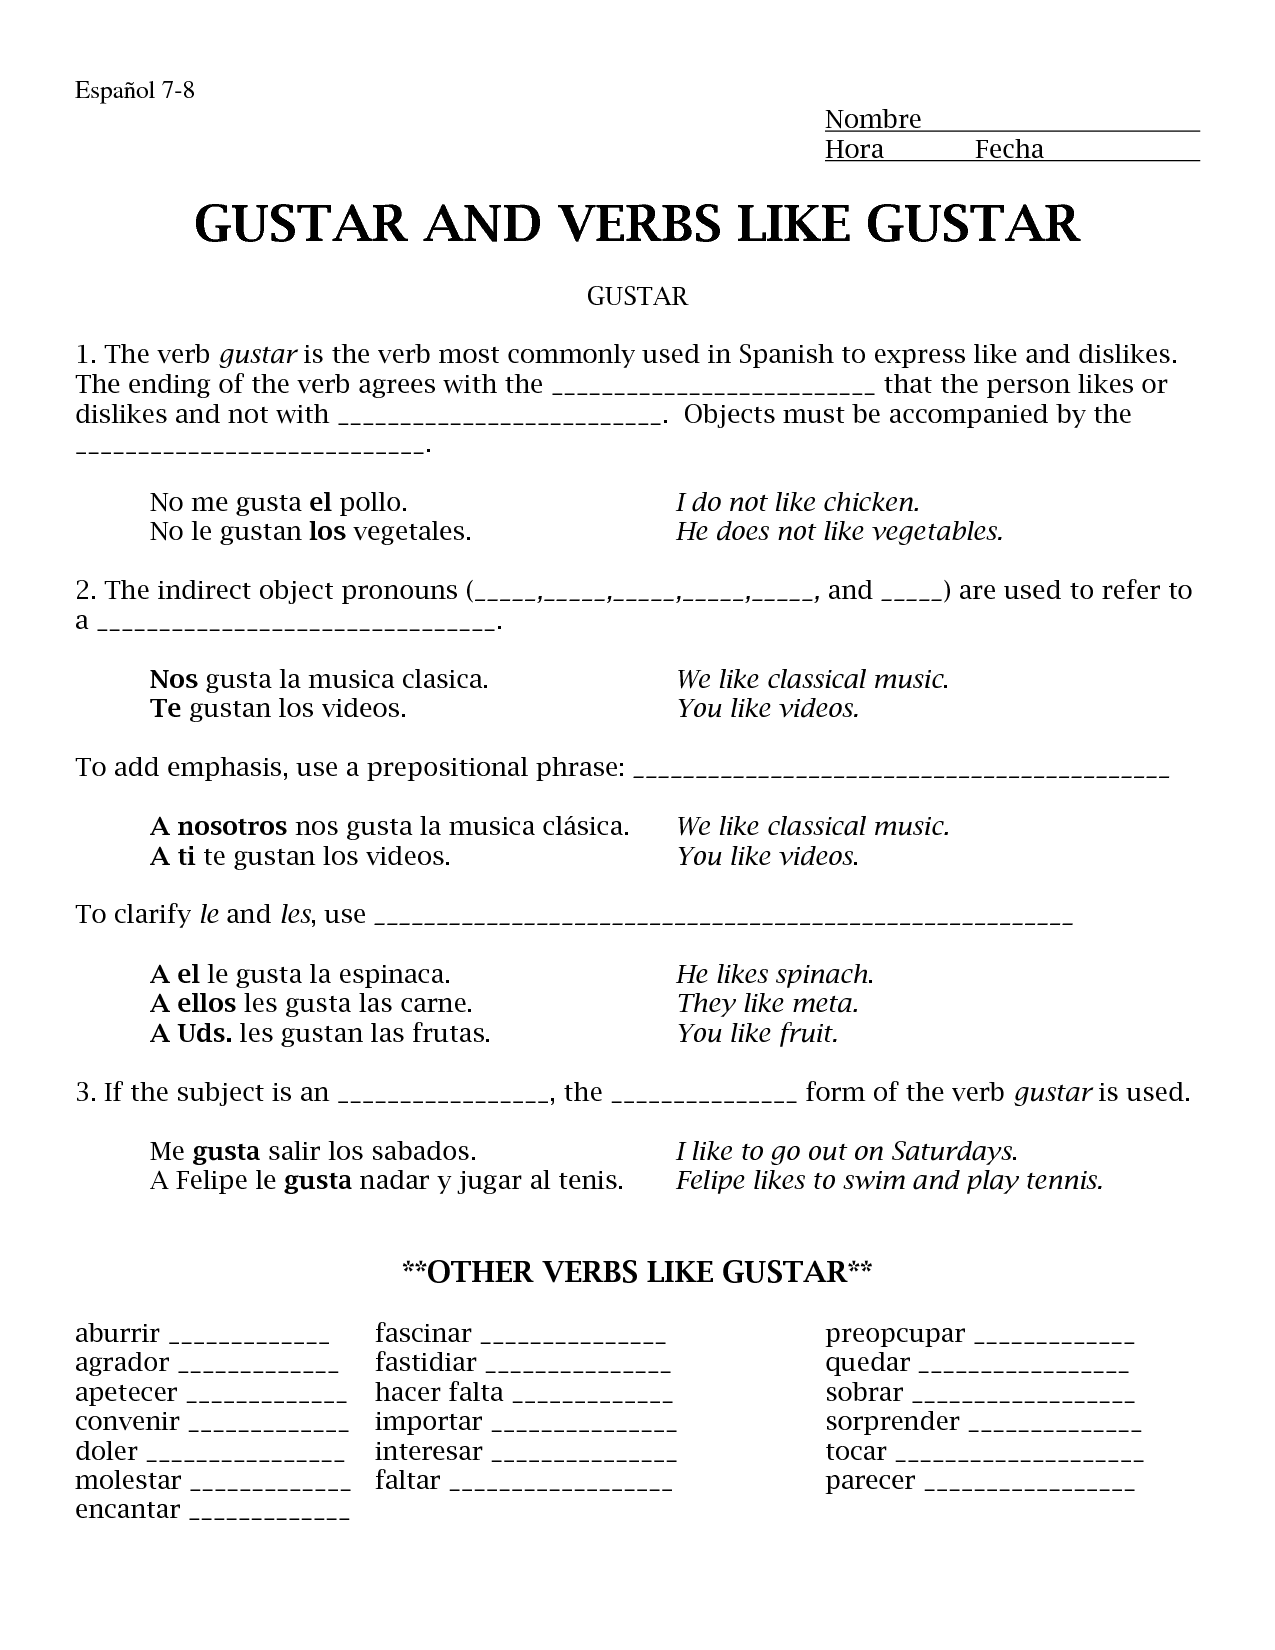 14 Best Images Of Spanish Gustar Worksheet Spanish Preterite And Imperfect Verb Chart Verbs